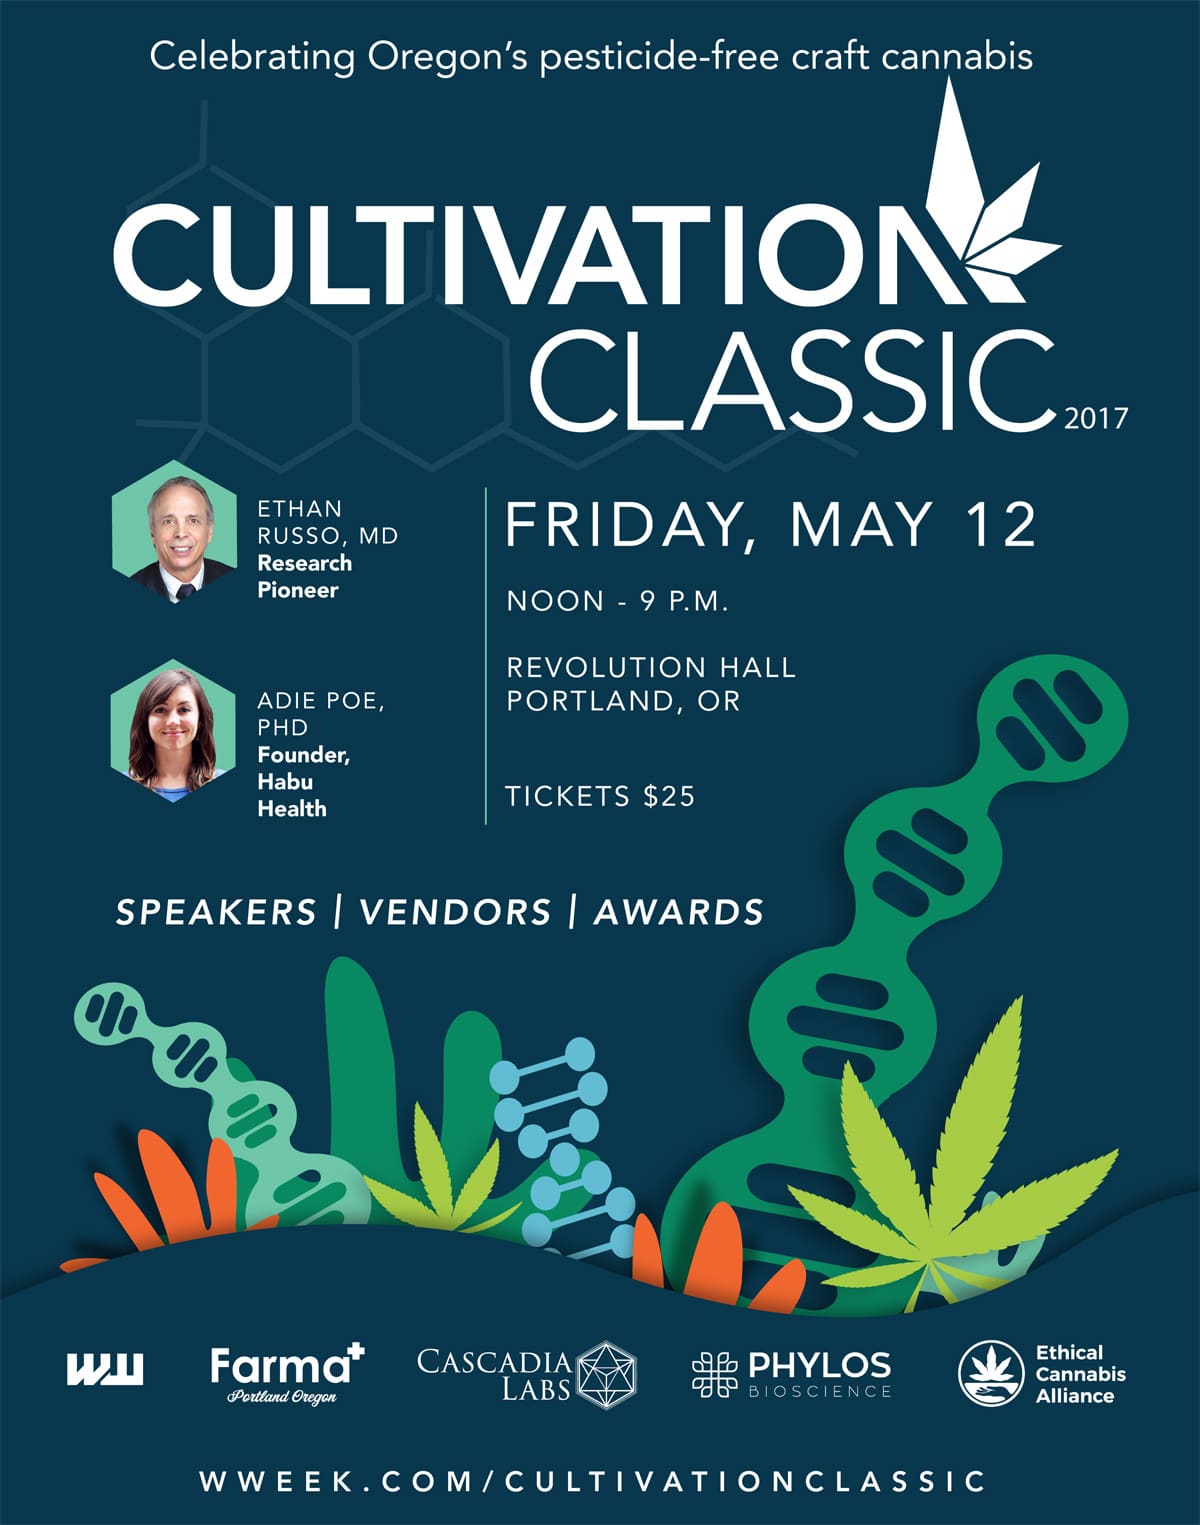 Cultivation Classic 2017